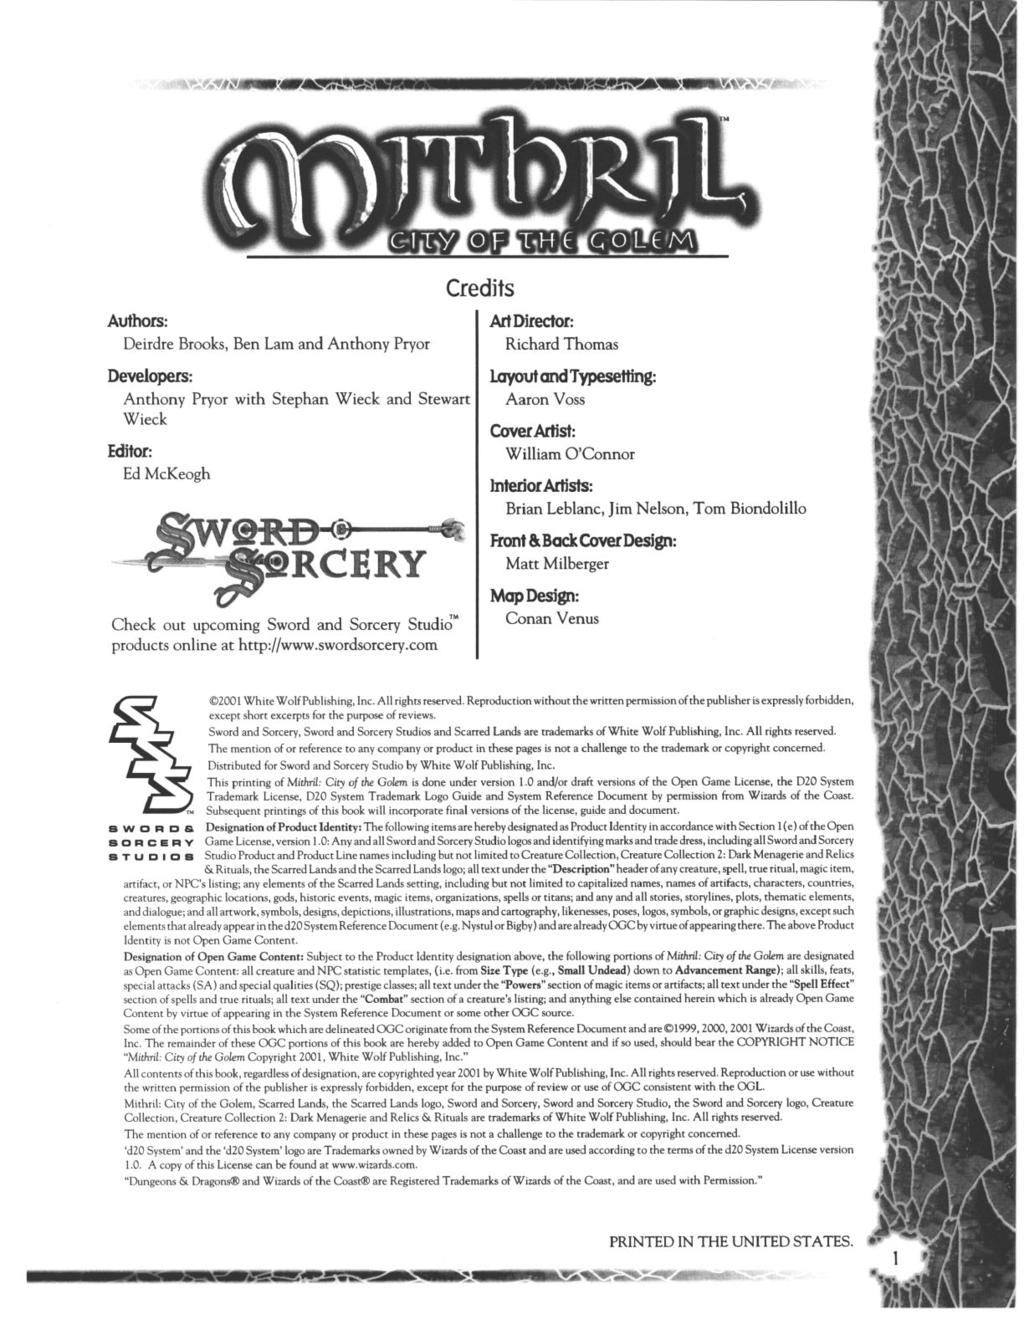 Authors: Deirdre Brooks, Ben Lam and Anthony Pryor Developers: Anthony Pryor with Stephan Wieck and Stewart Wieck Editor: Ed McKeogh a Check out upcoming Sword and Sorcery Studid products online at